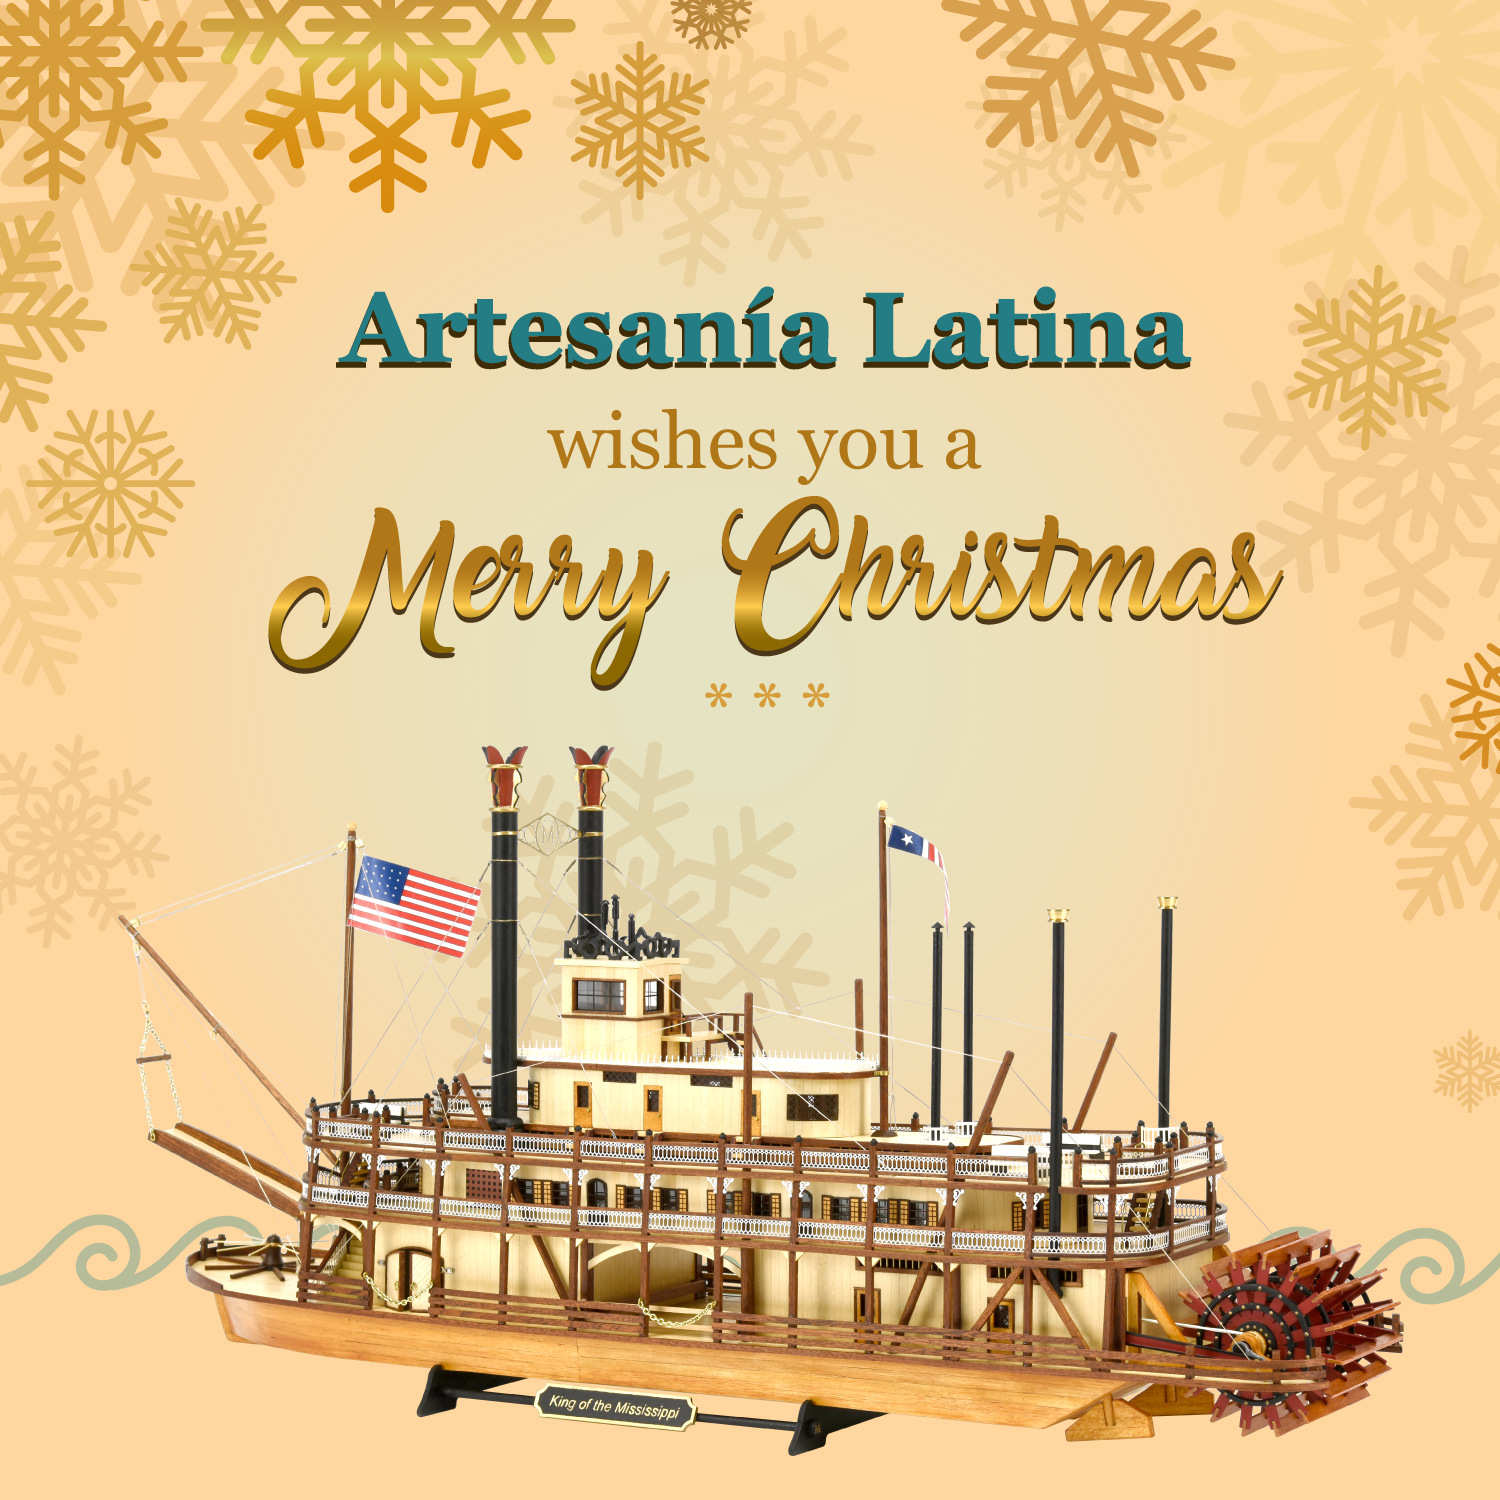 Model Building at Christmas: Artesanía Latina Wishes You a Happy Holidays and a 2023 Full of Modeling!